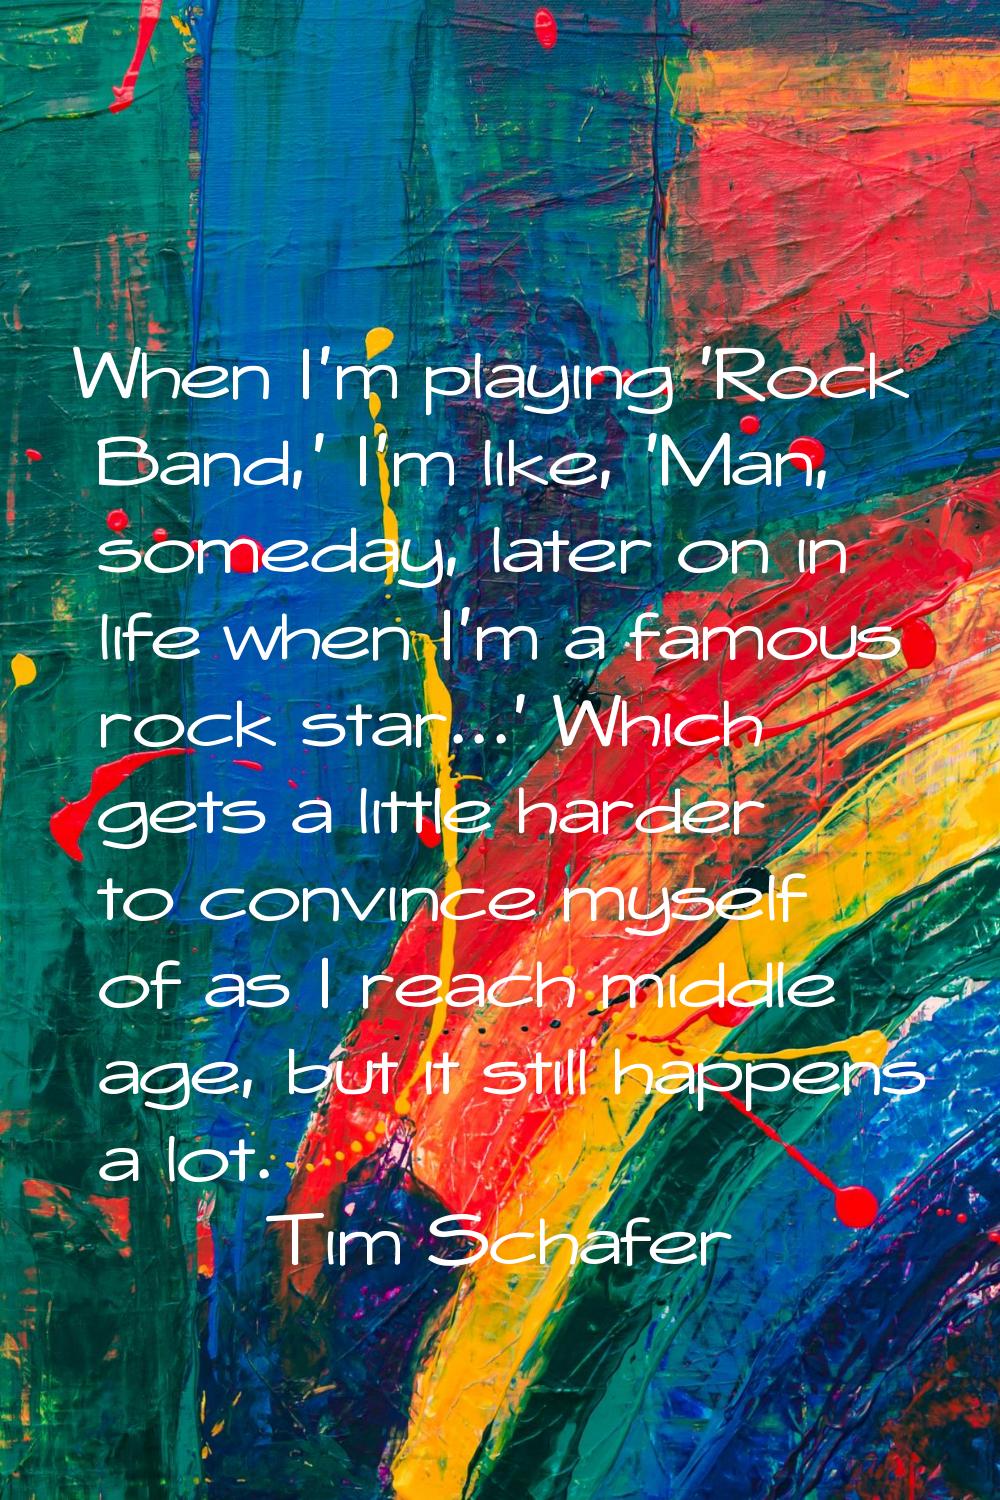 When I'm playing 'Rock Band,' I'm like, 'Man, someday, later on in life when I'm a famous rock star